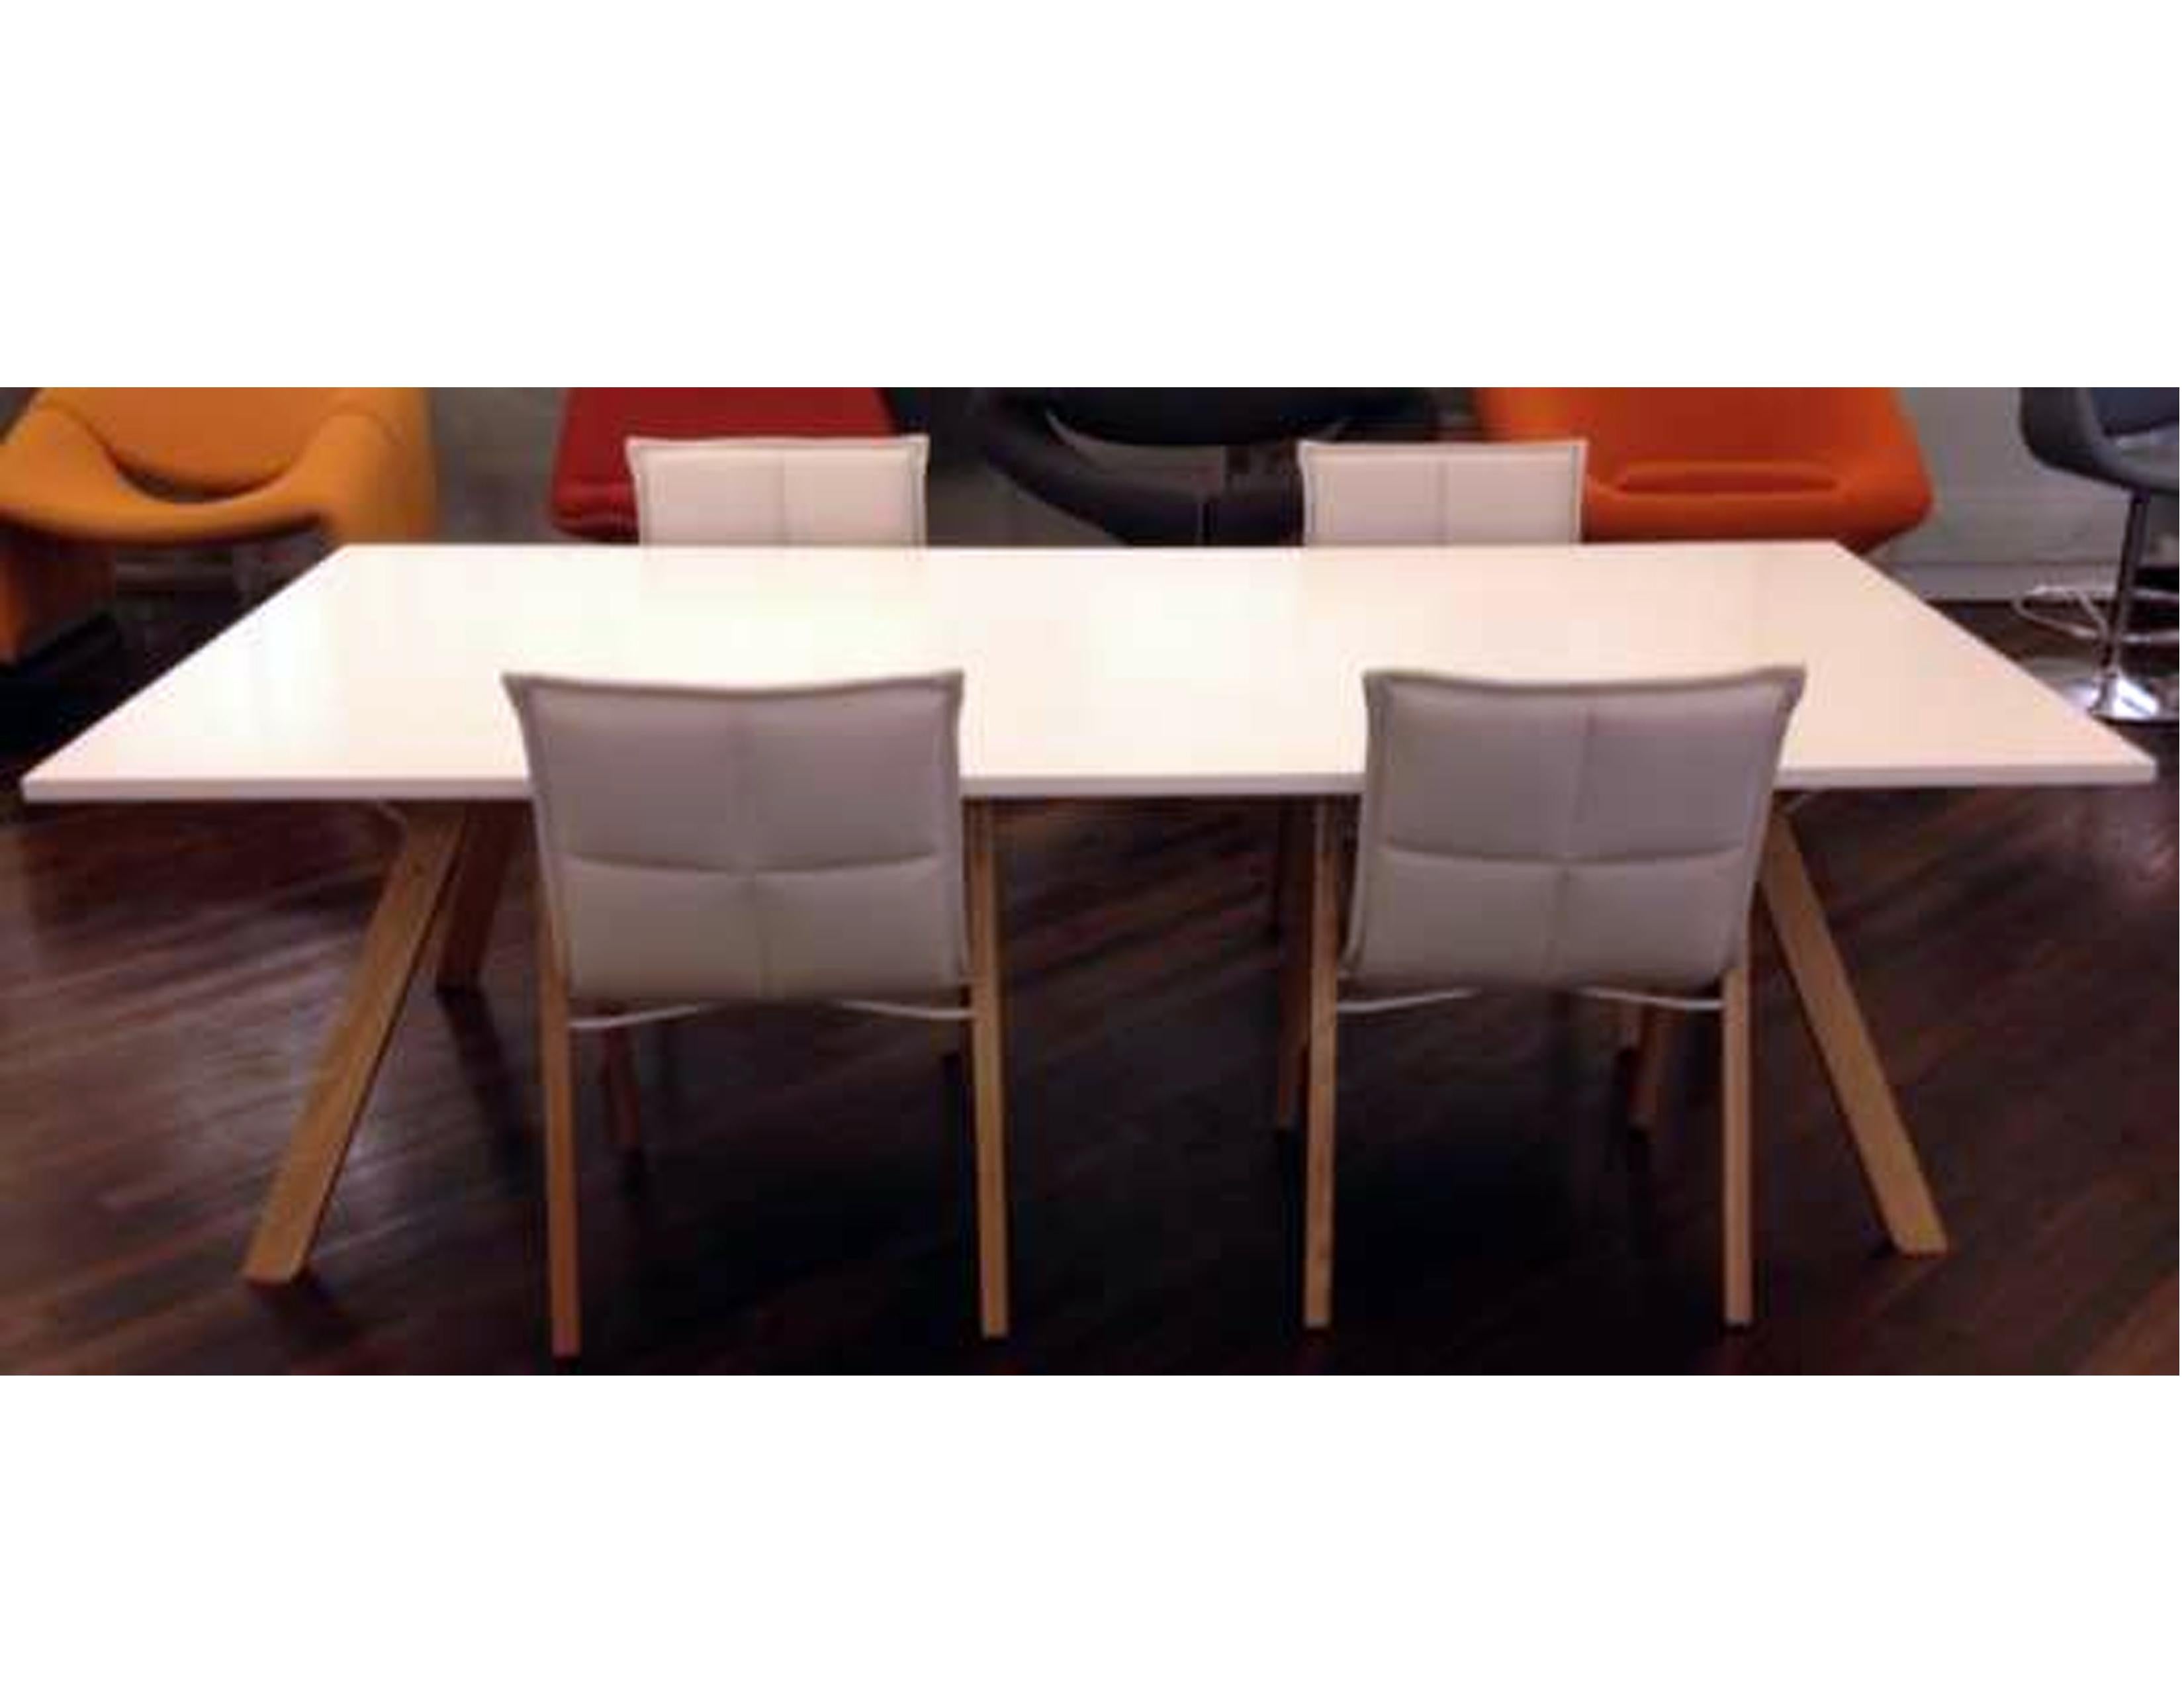 M2L / Inno lab table
Oak natural frame
240 cm x 120 cm
White stained birch veneer top.
Cozy convention of the Lab table and chair series. Lab table is a casual meeting or dining table.
Lab product family has been granted the internationally